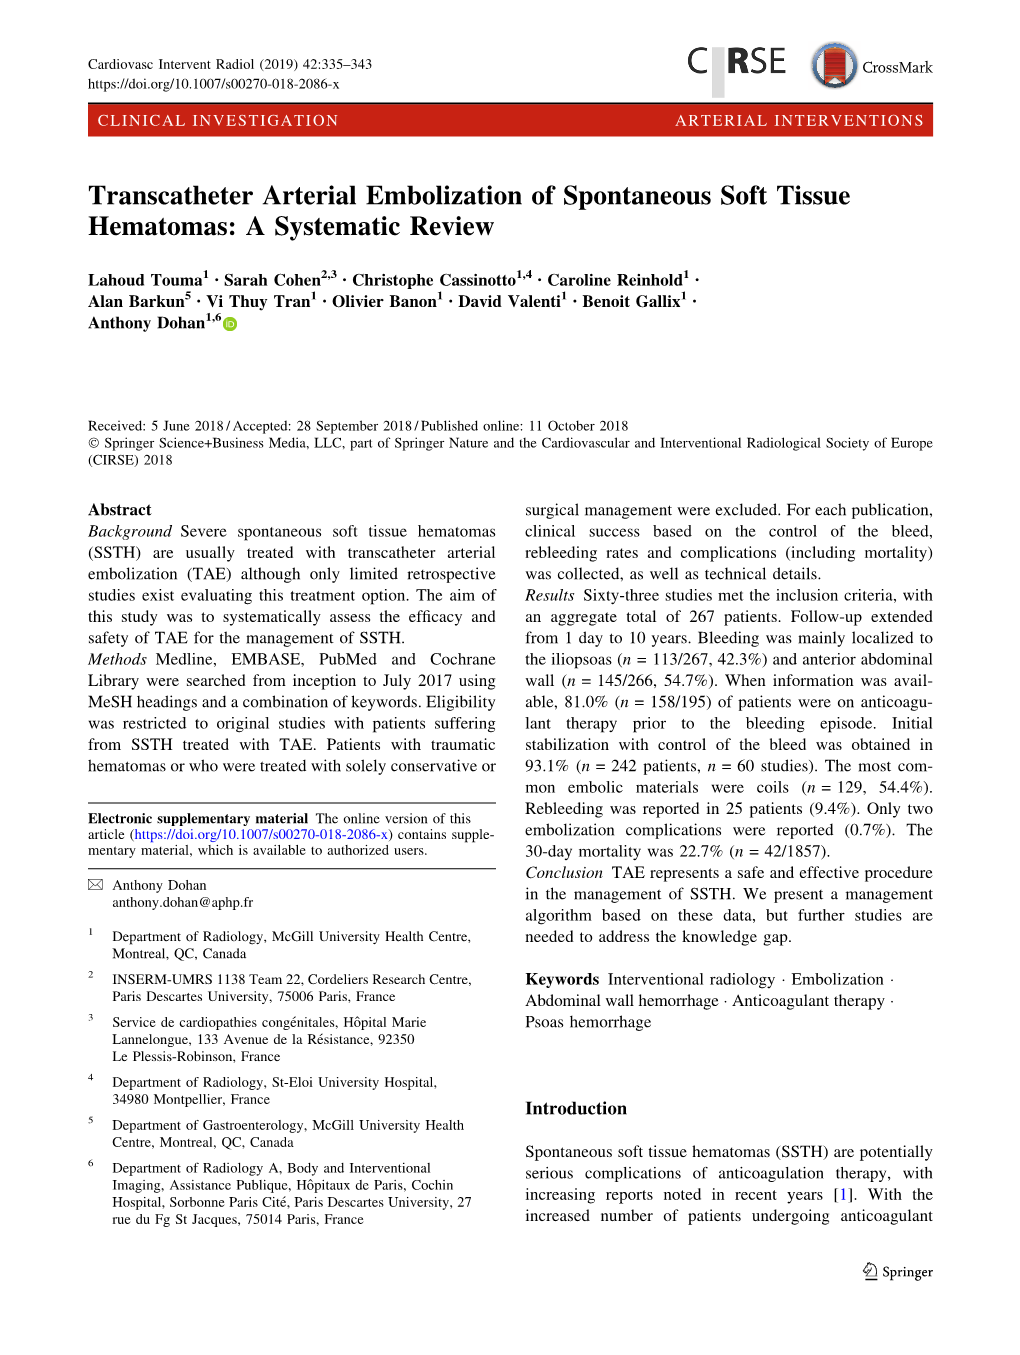 Transcatheter Arterial Embolization of Spontaneous Soft Tissue Hematomas: a Systematic Review